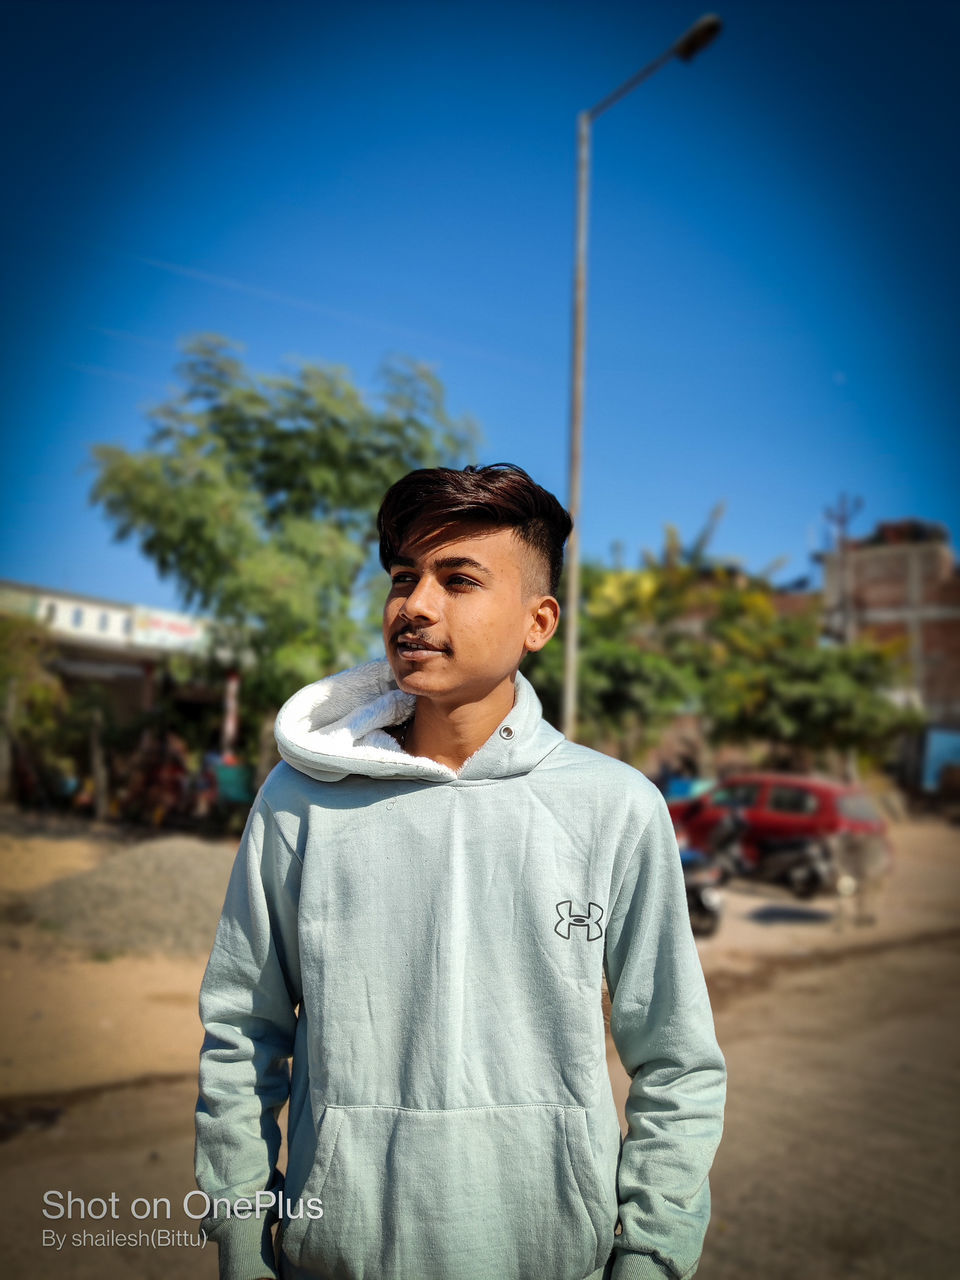 one person, sky, city, standing, blue, street, young adult, men, adult, waist up, architecture, casual clothing, nature, looking, emotion, clothing, tree, front view, day, lifestyles, spring, portrait, outdoors, person, focus on foreground, looking away, happiness, clear sky, city life, smiling, building exterior, road, copy space